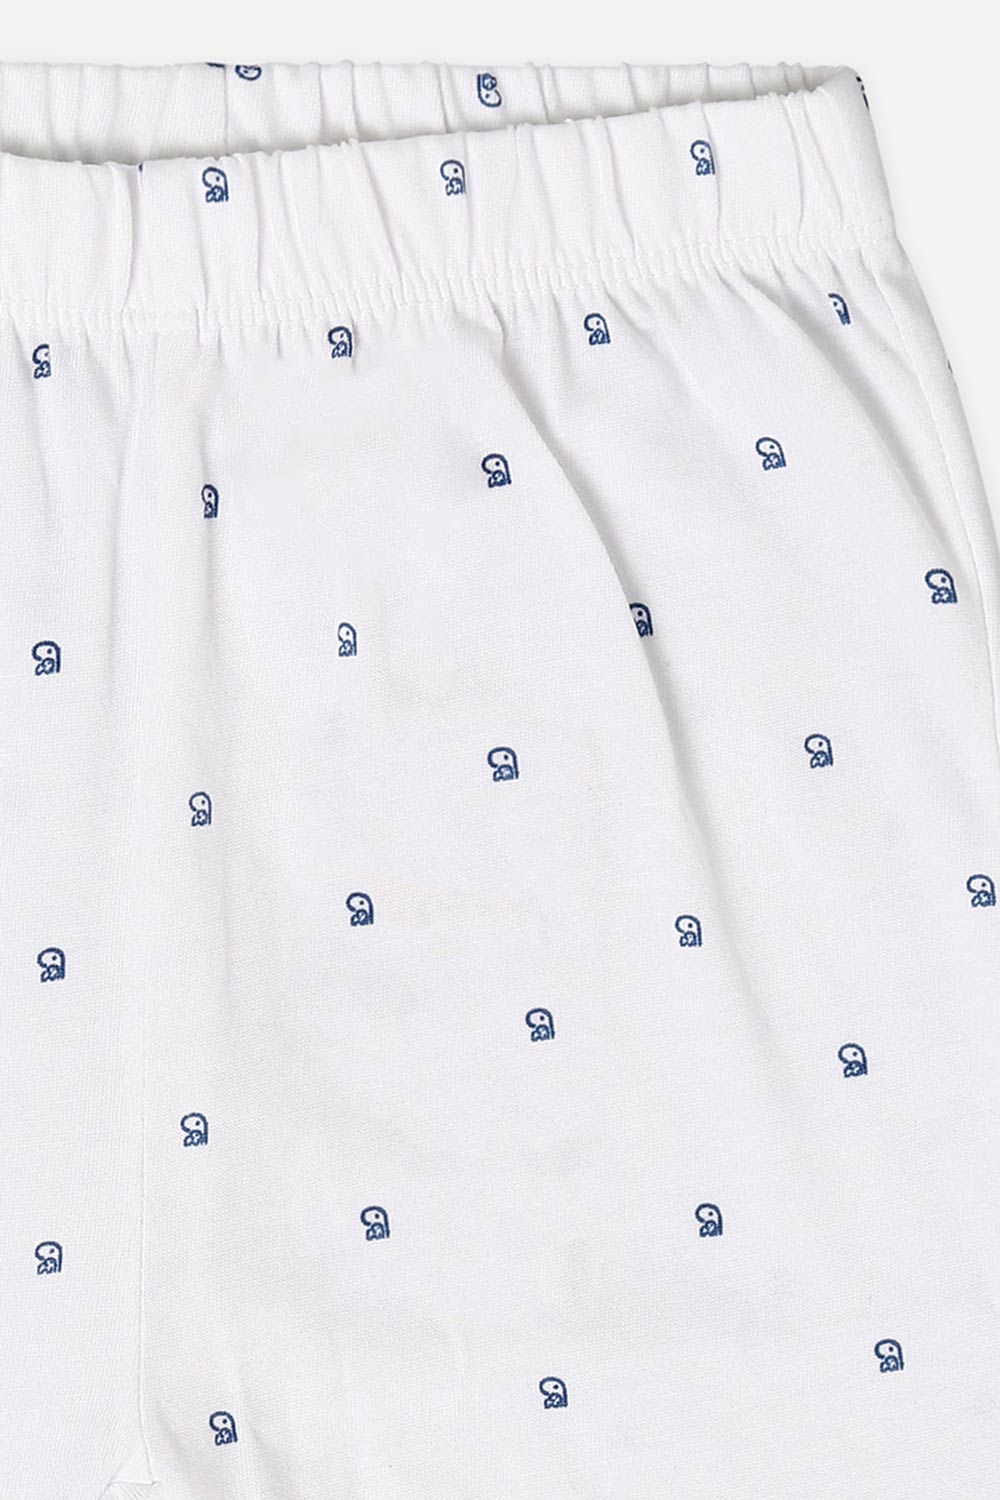 Oh Baby Comfy Pant White-Tr11